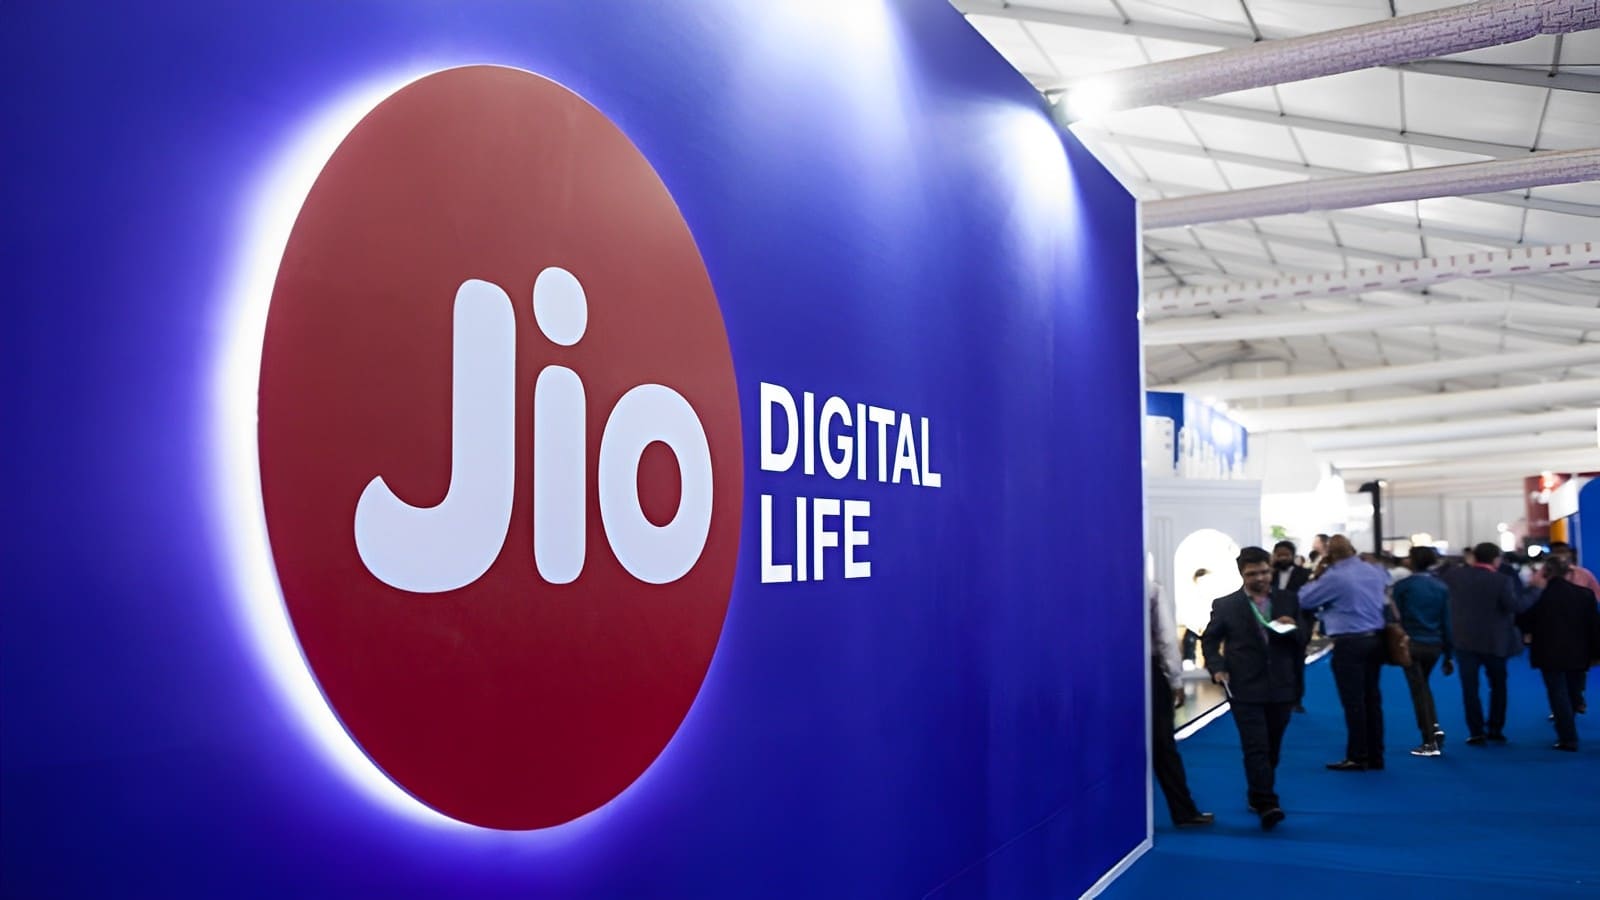 FTSE reverses decision: Jio Financial stays in global indices